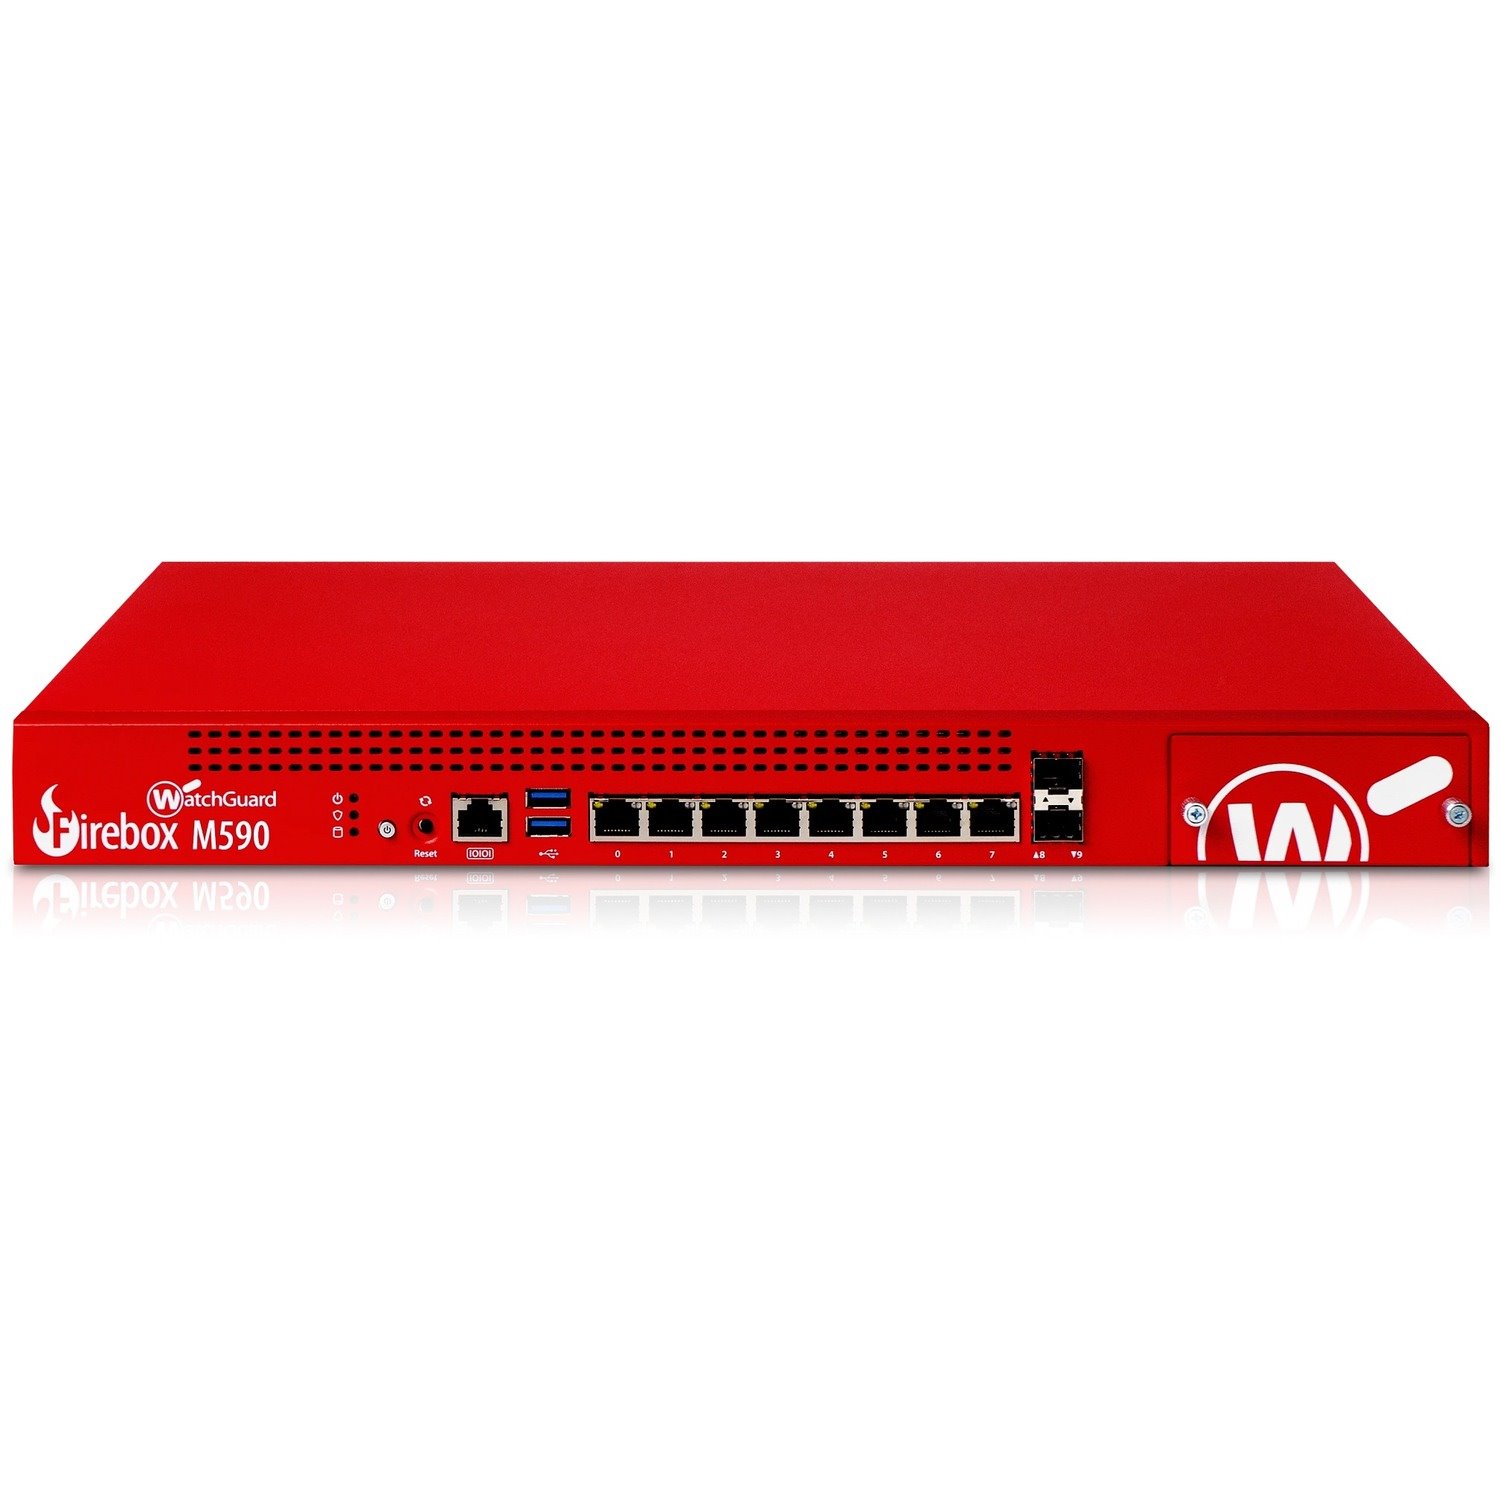 Trade up to WatchGuard Firebox M590 with 3-yr Basic Security Suite